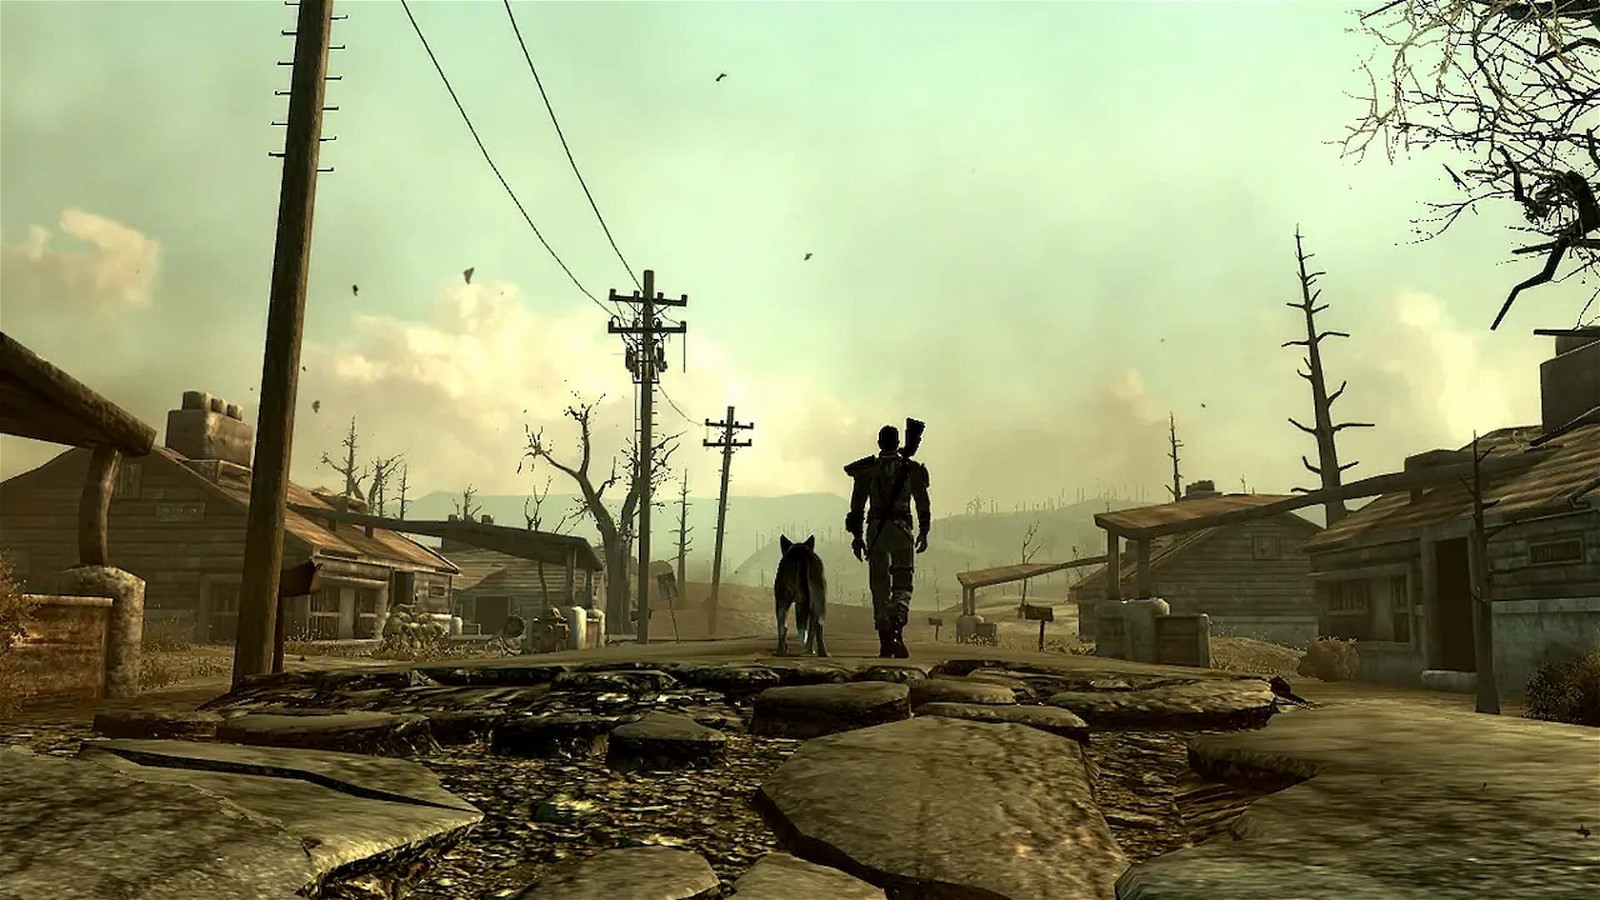 Fallout 3 fans have wanted a Remastered game for a long time and they might get one